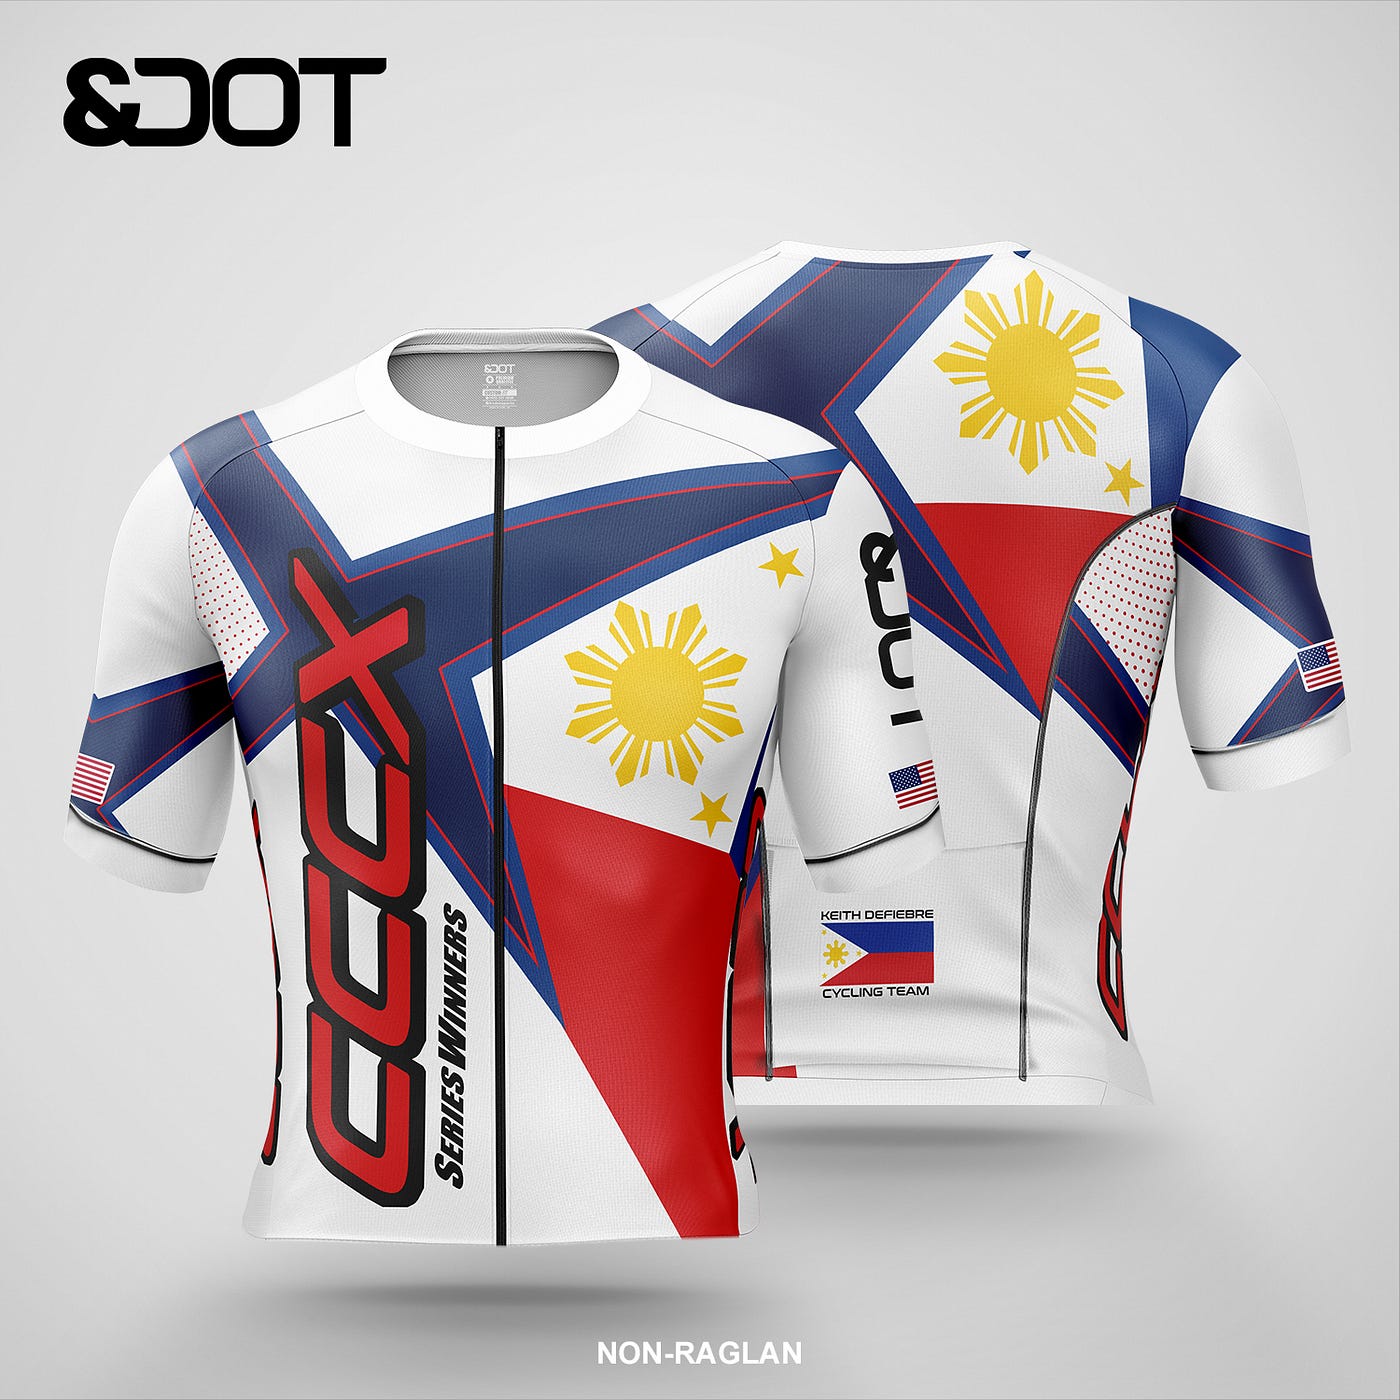 Design sublimation cycling jerseys, shorts and apparel by